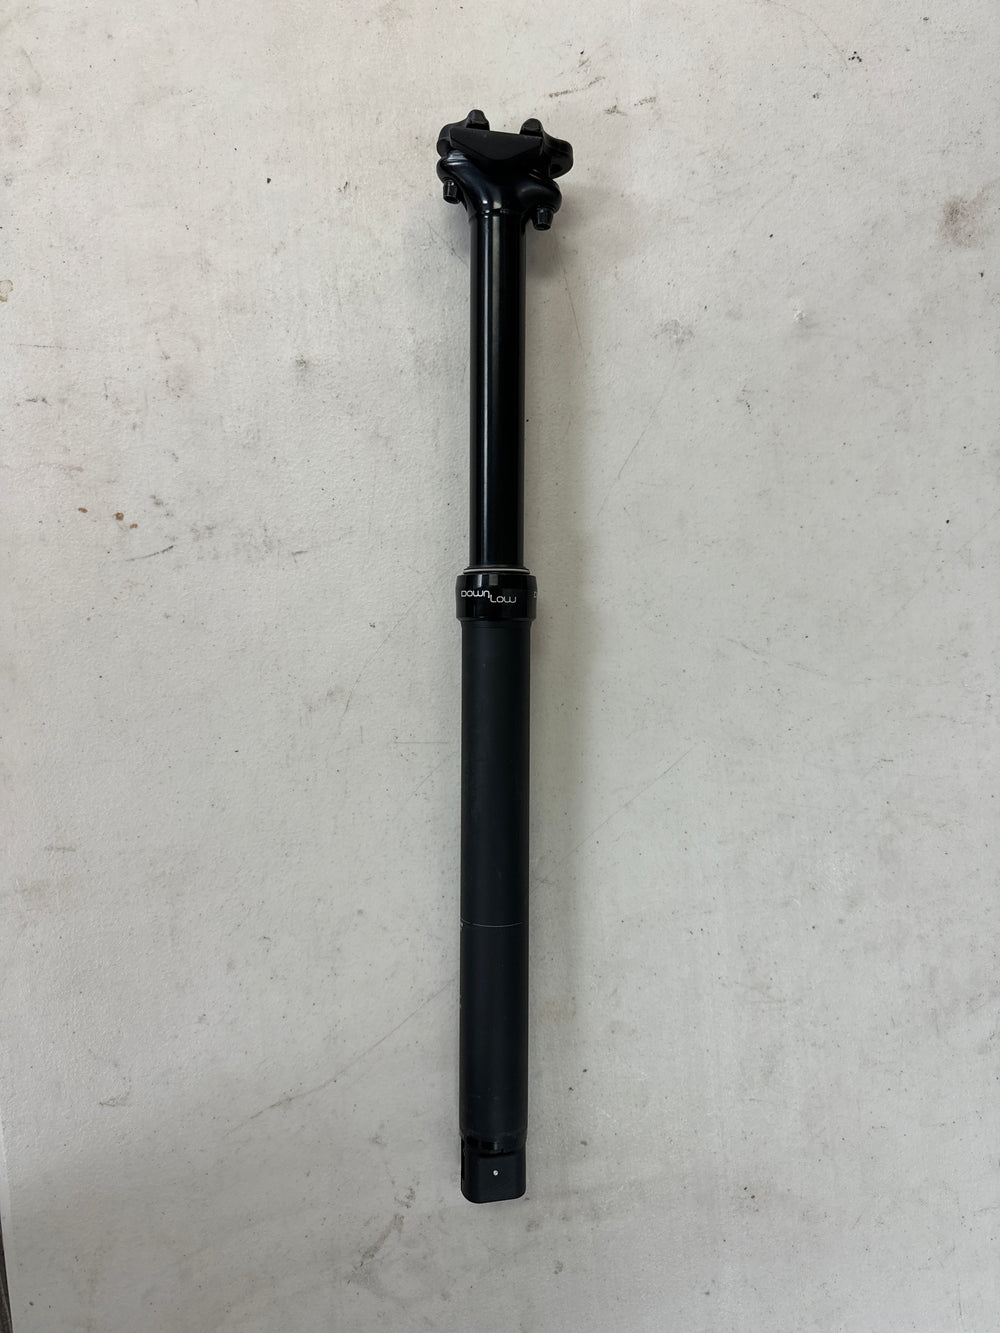  Cannondale DownLow 31.6/150mm Dropper Post